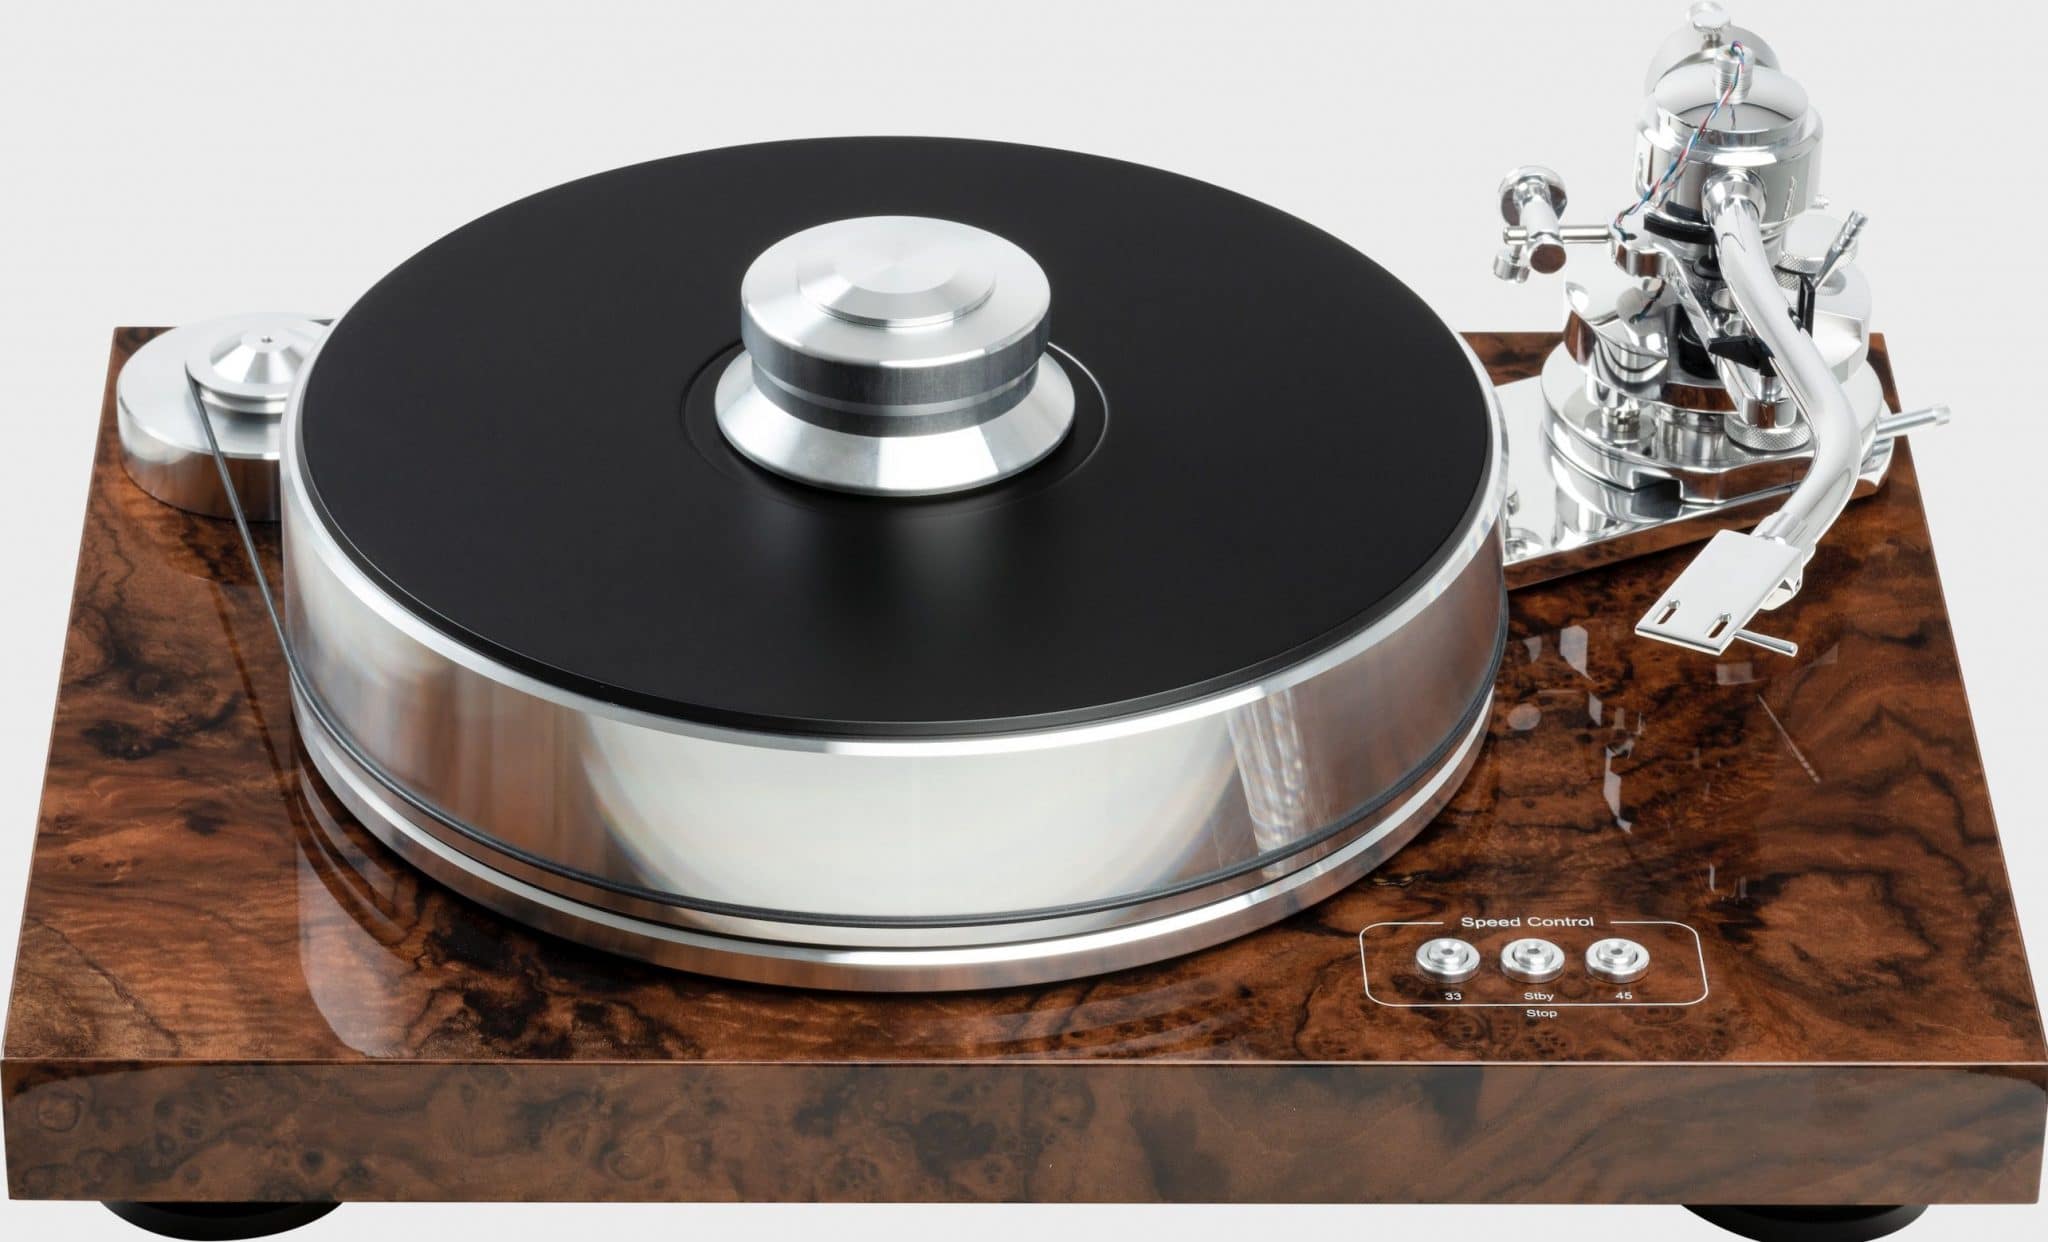 Pro-Ject Upgrade High-End Turntables - The Audiophile Man